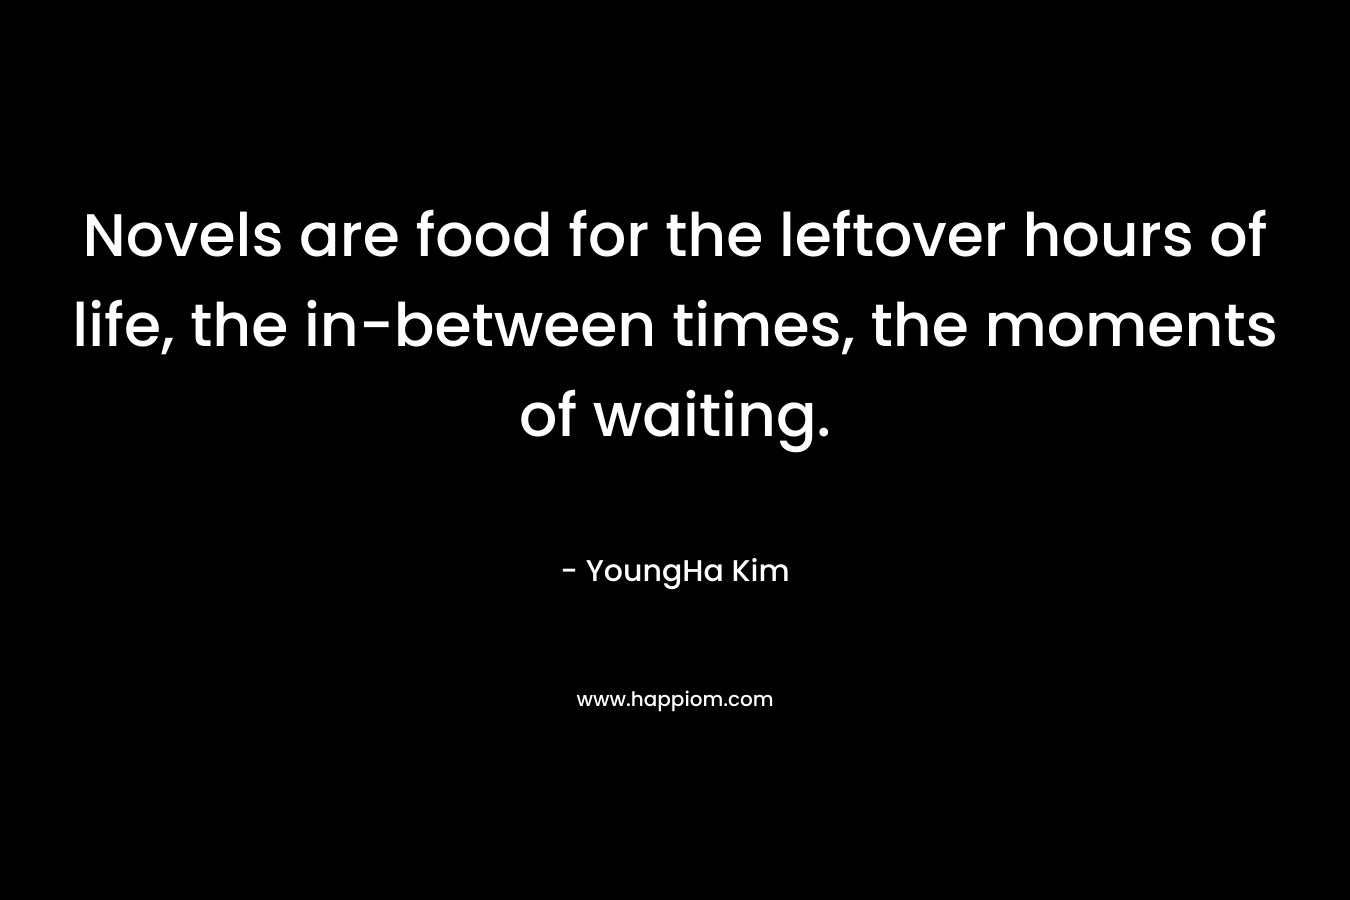 Novels are food for the leftover hours of life, the in-between times, the moments of waiting. – YoungHa Kim